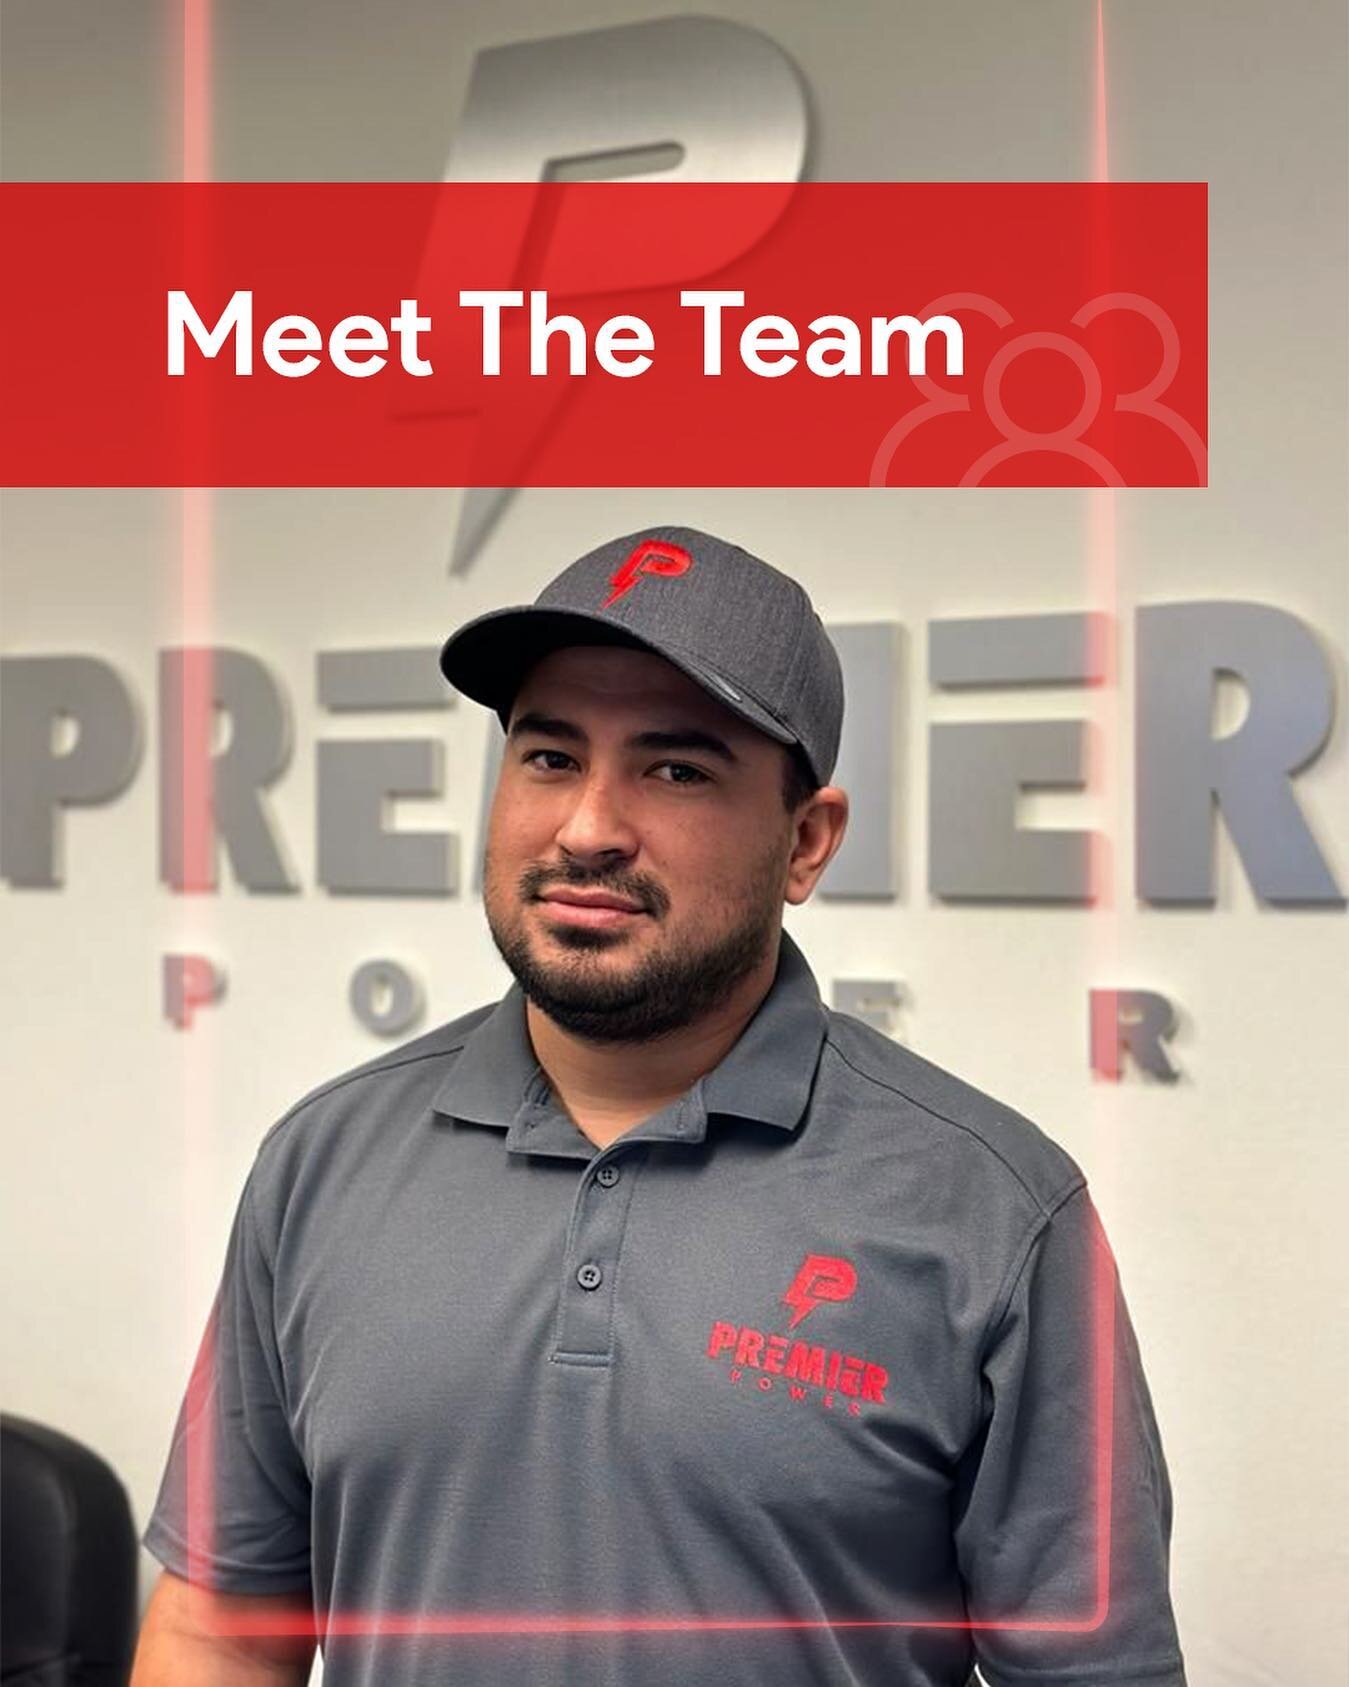 Meet Vincent, he is a field technician at our Riverside &amp; Orange County Offices. He ensures that all your electrical needs are taken care of safely and in timely manner!
.
.
.
#premierpower #power #electrical #electric #electricneeds #meettheteam